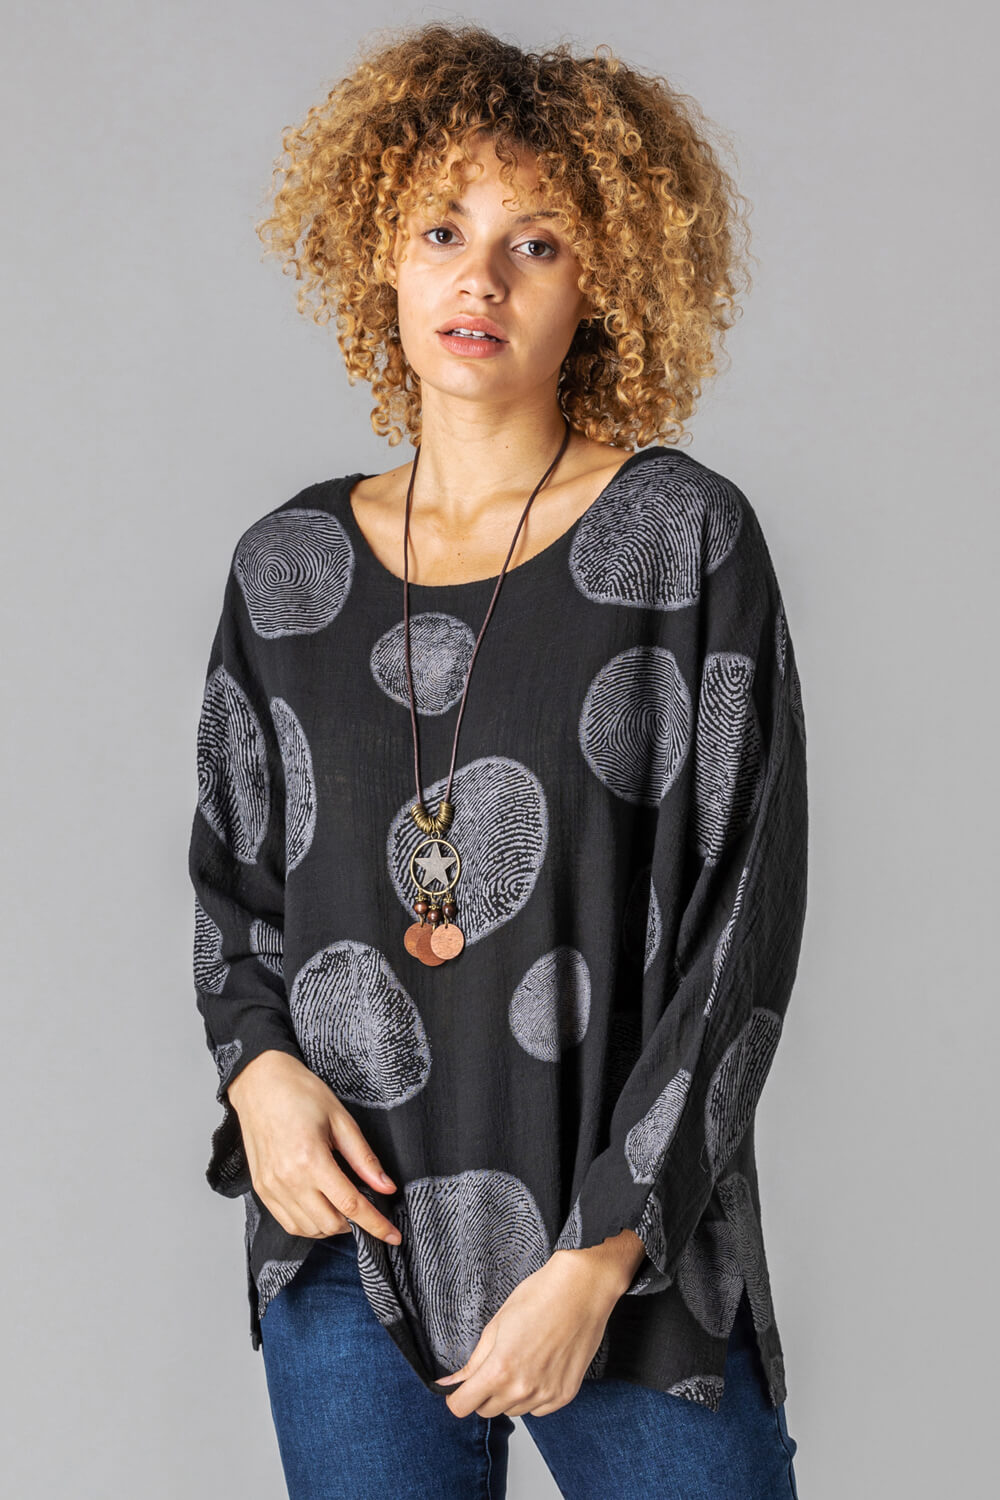 Spot Print Top with Necklace